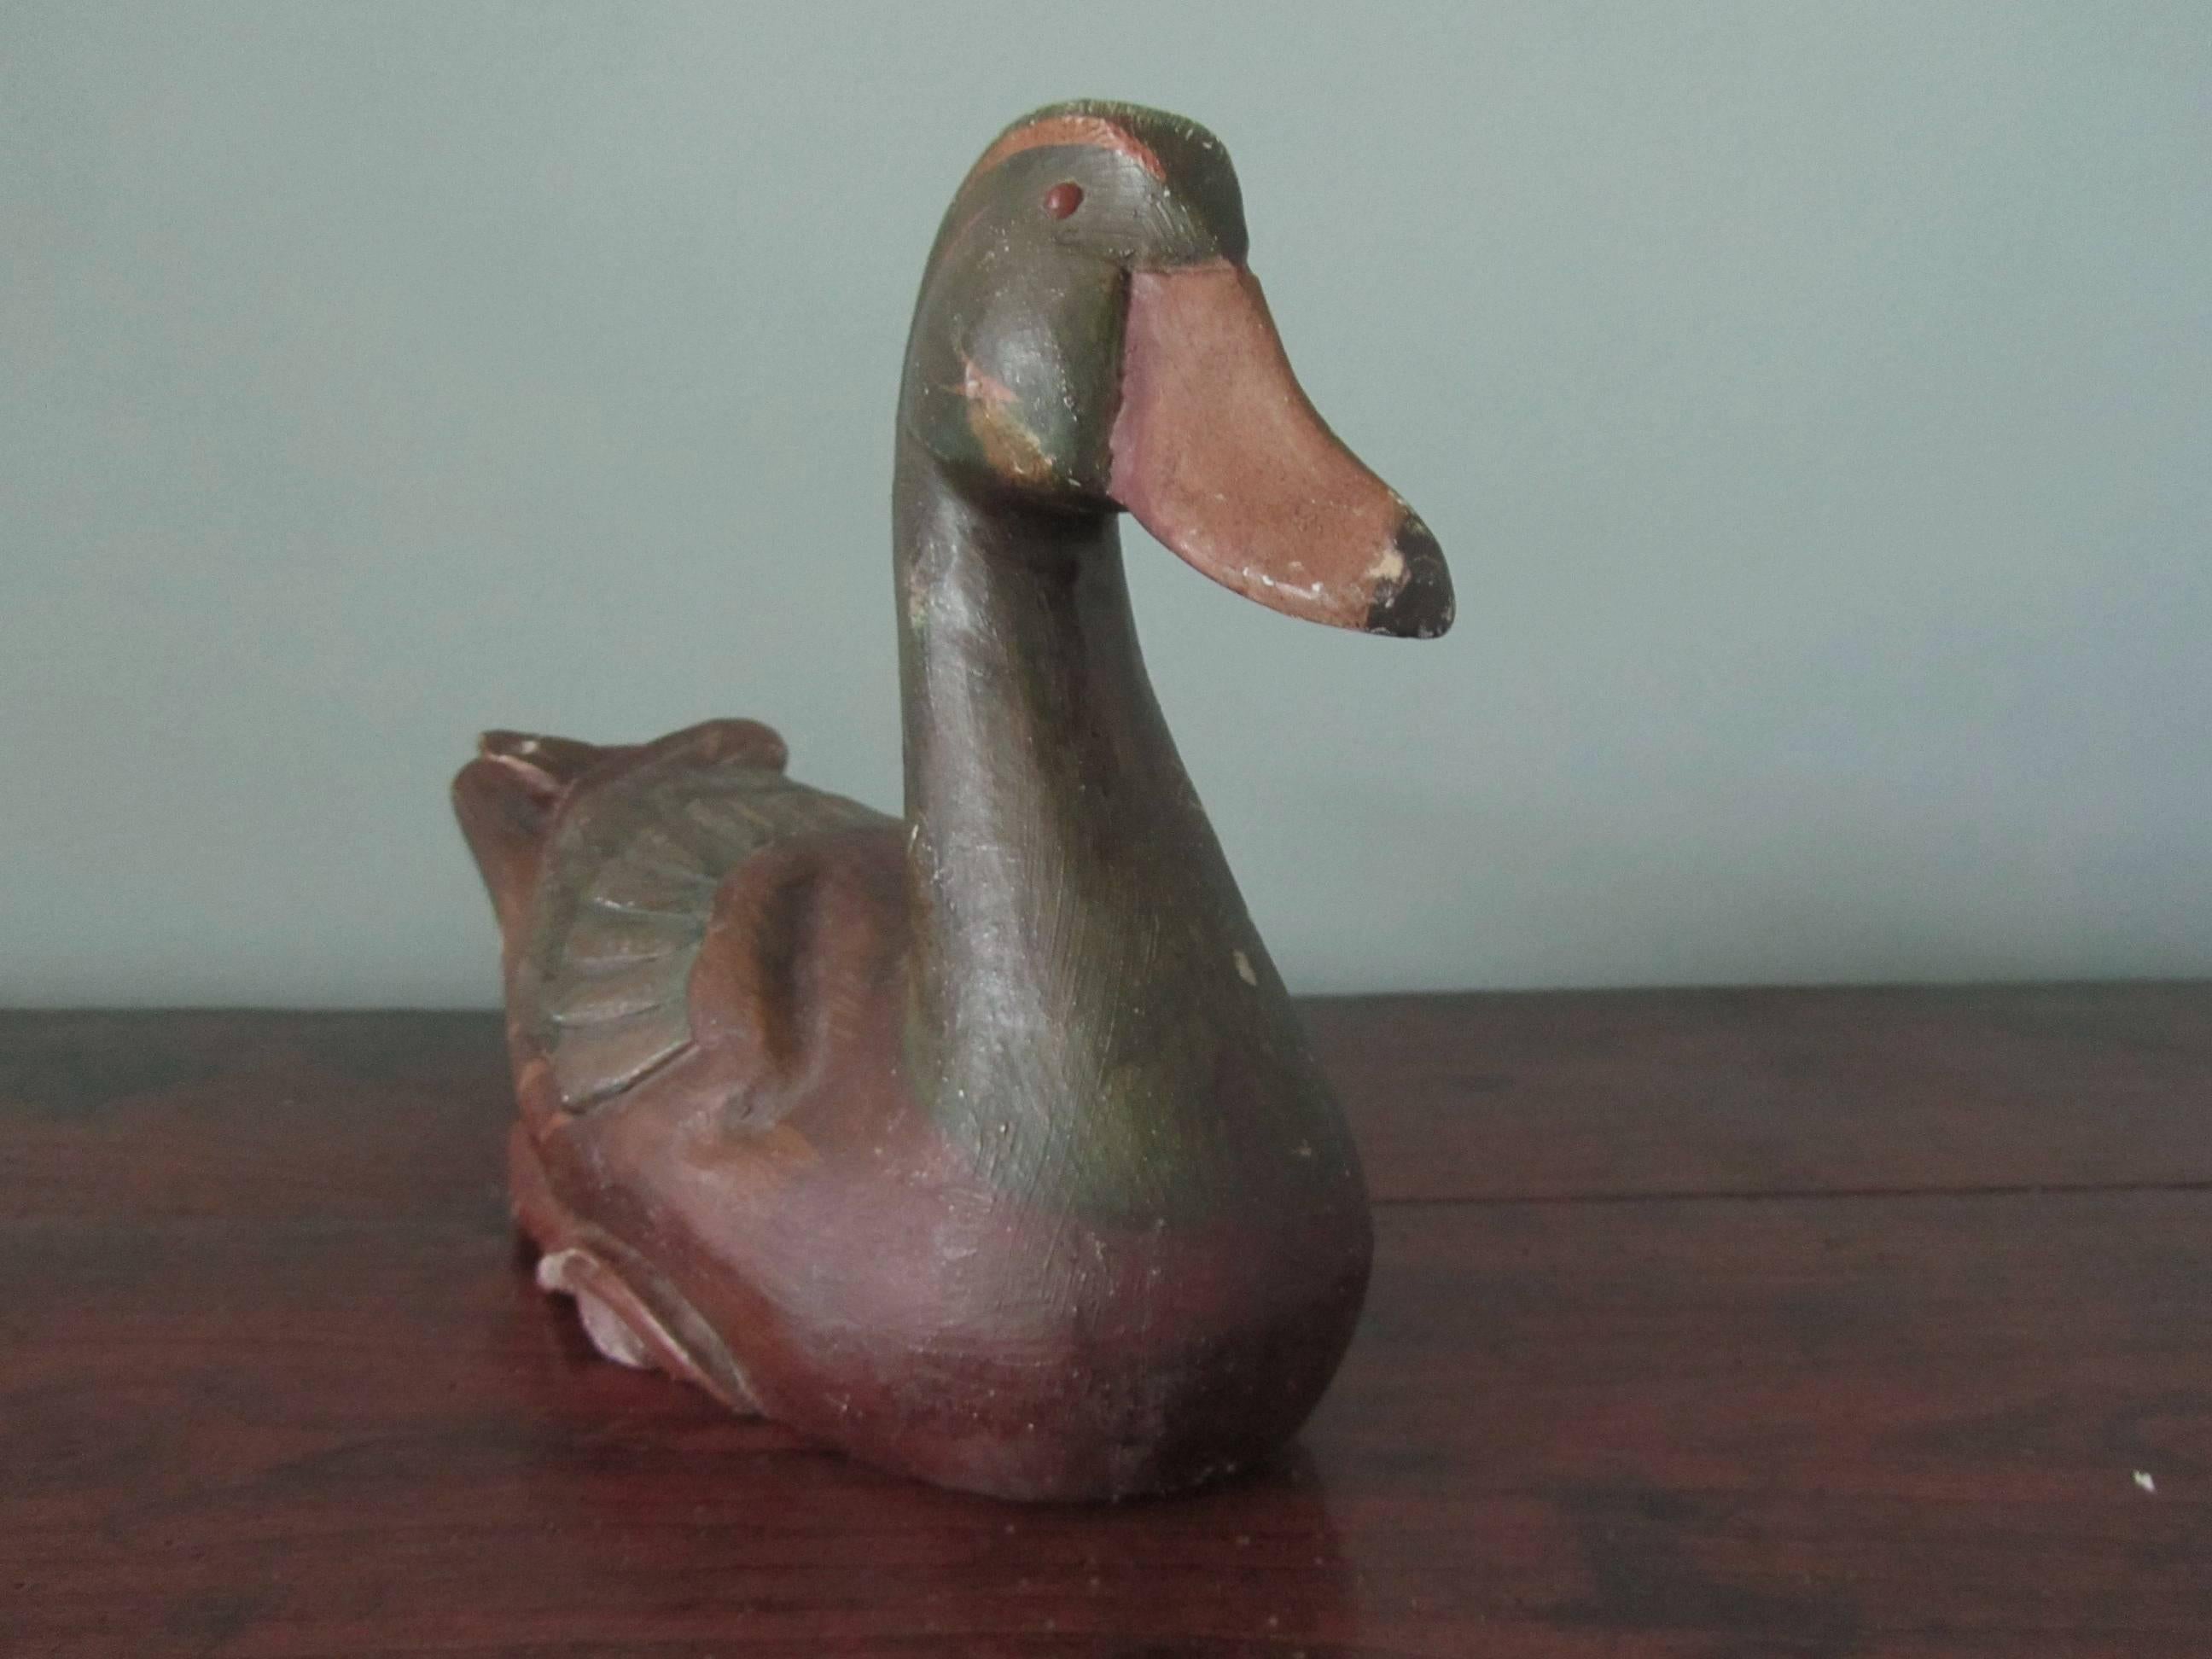 Superbly painted and carved decoy duck

This is a good 19th century decoy, he is carved from one piece of hardwood and his feathers and features are carved and painted in quite fine detail, he has red glass eyes, this is a genuine old piece and